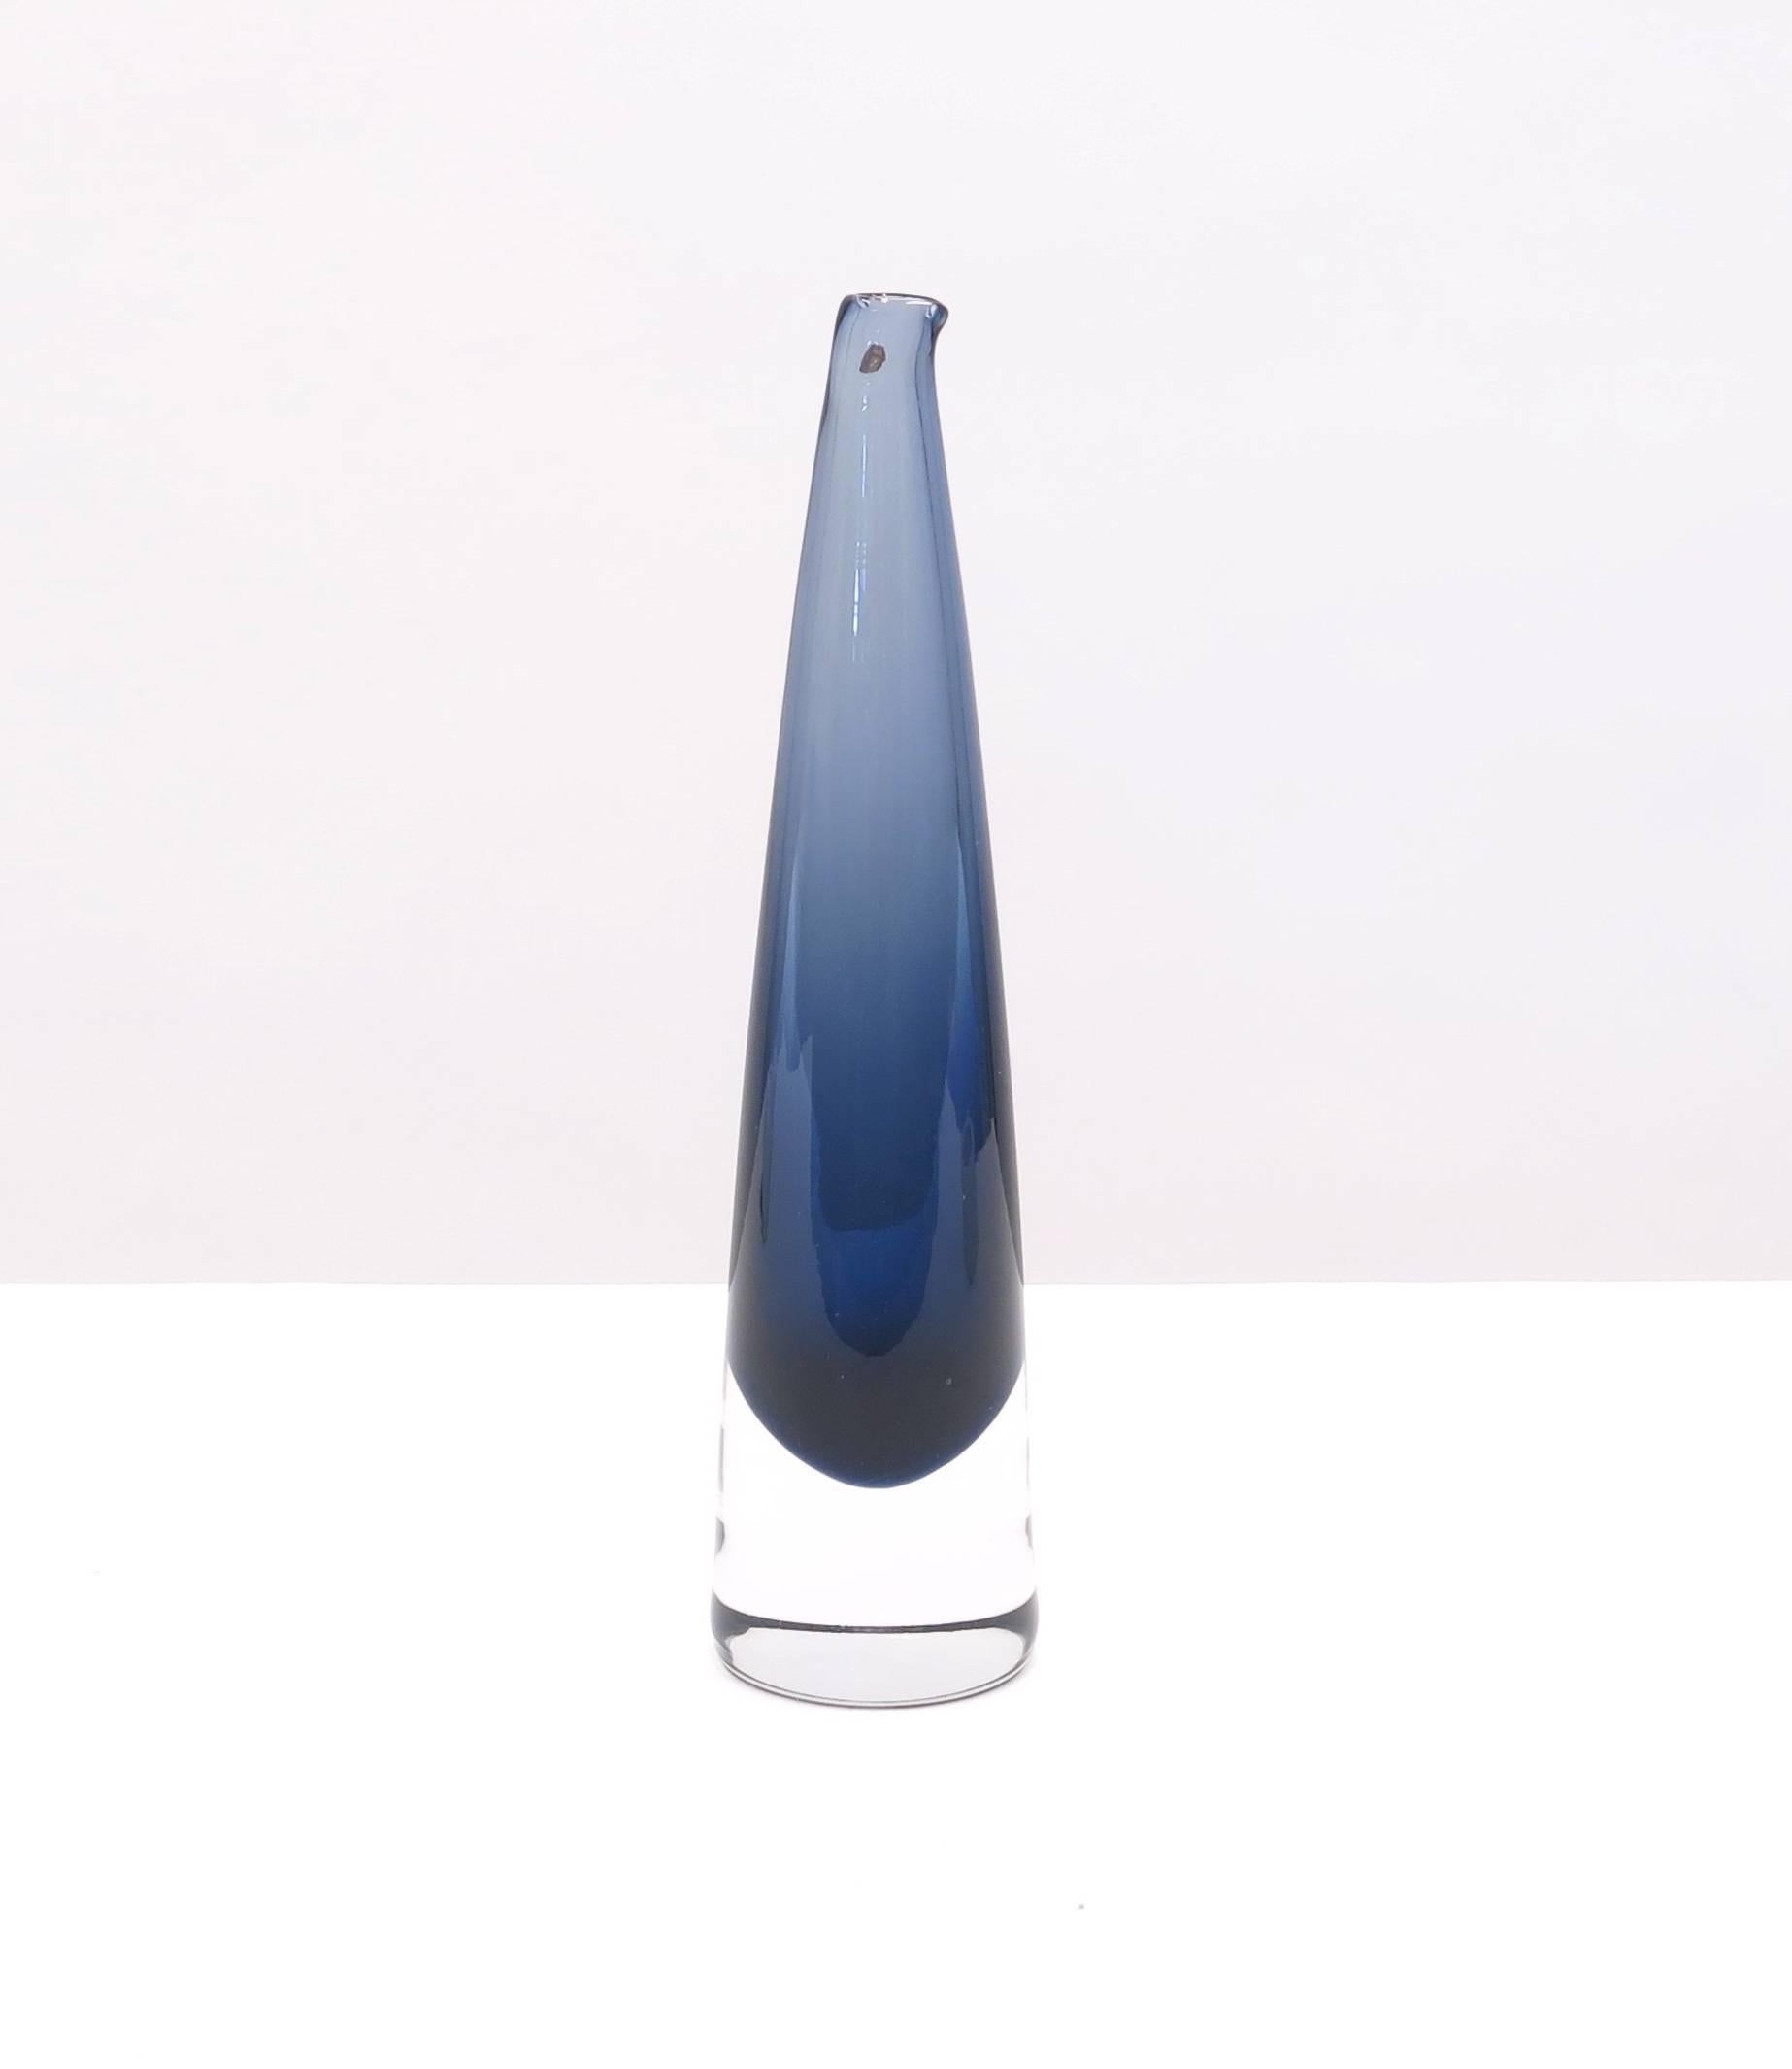 Small blue glass carafe, model 3288, was designed by Timo Sarpaneva for Iittala in the 1950s. Its also called 